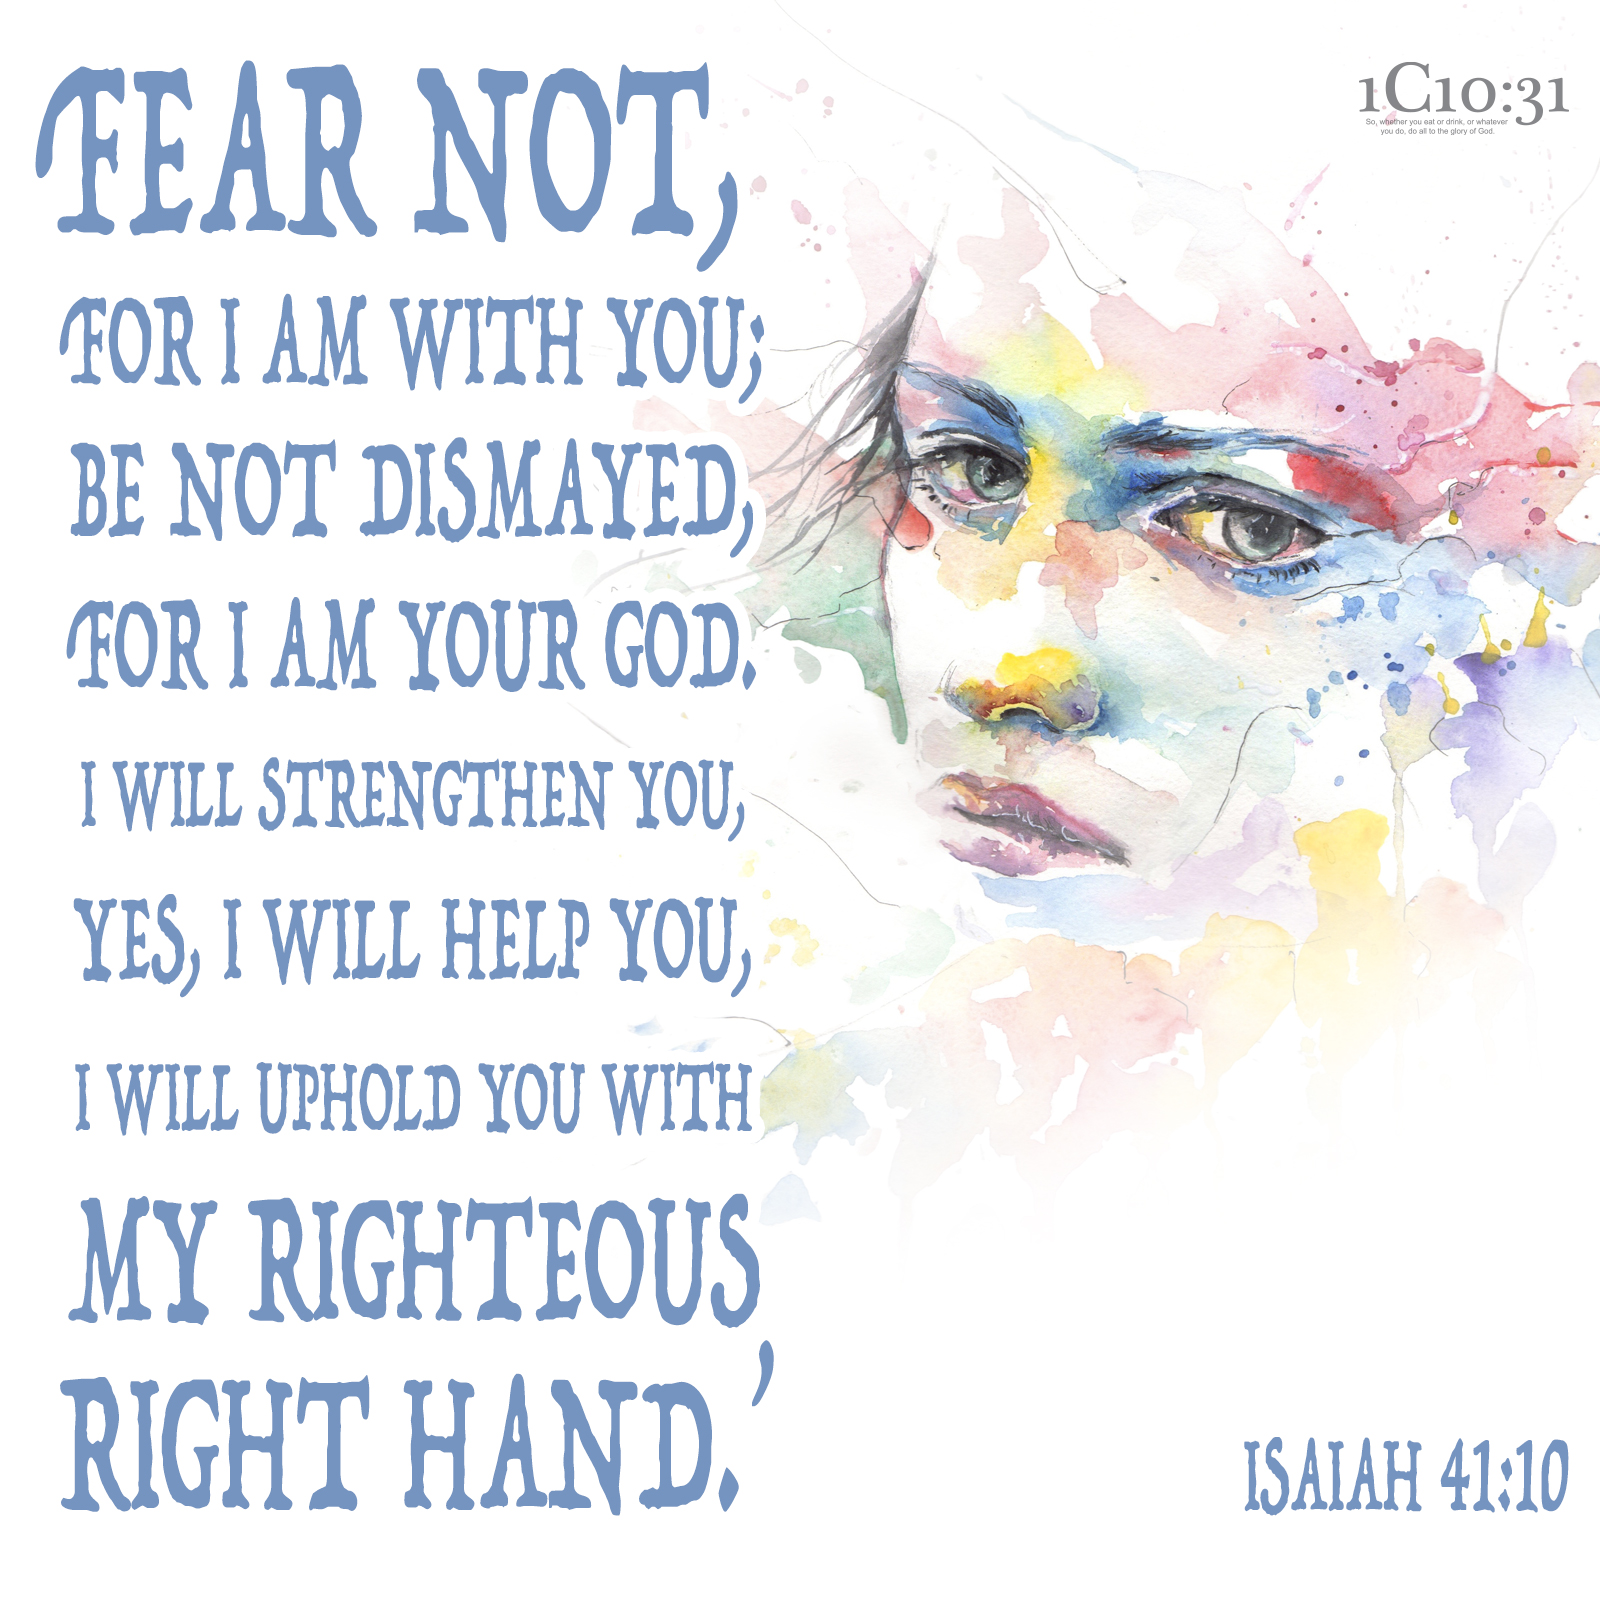 Isaiah 41:10 NKJV Fear not, for I am with you; Be not dismayed, for I am your God. I will strengthen you, Yes, I will help you, I will uphold you with My righteous right hand.’